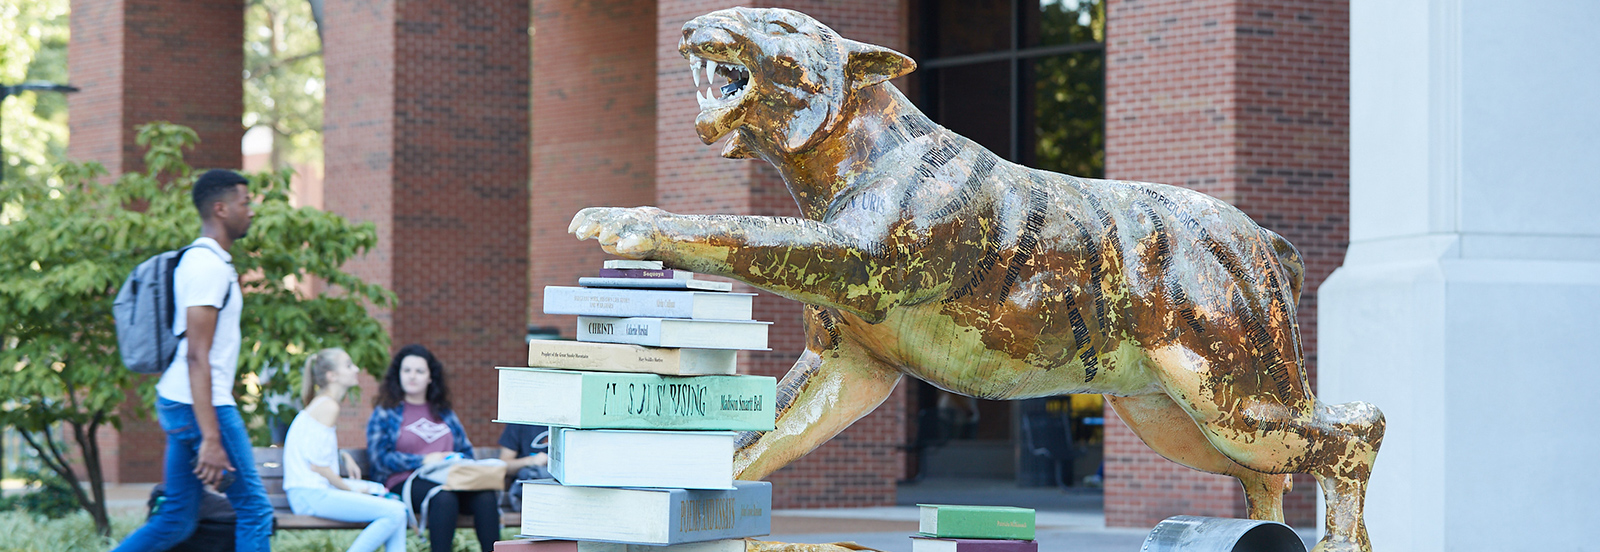 Tiger statue in front of U of M library